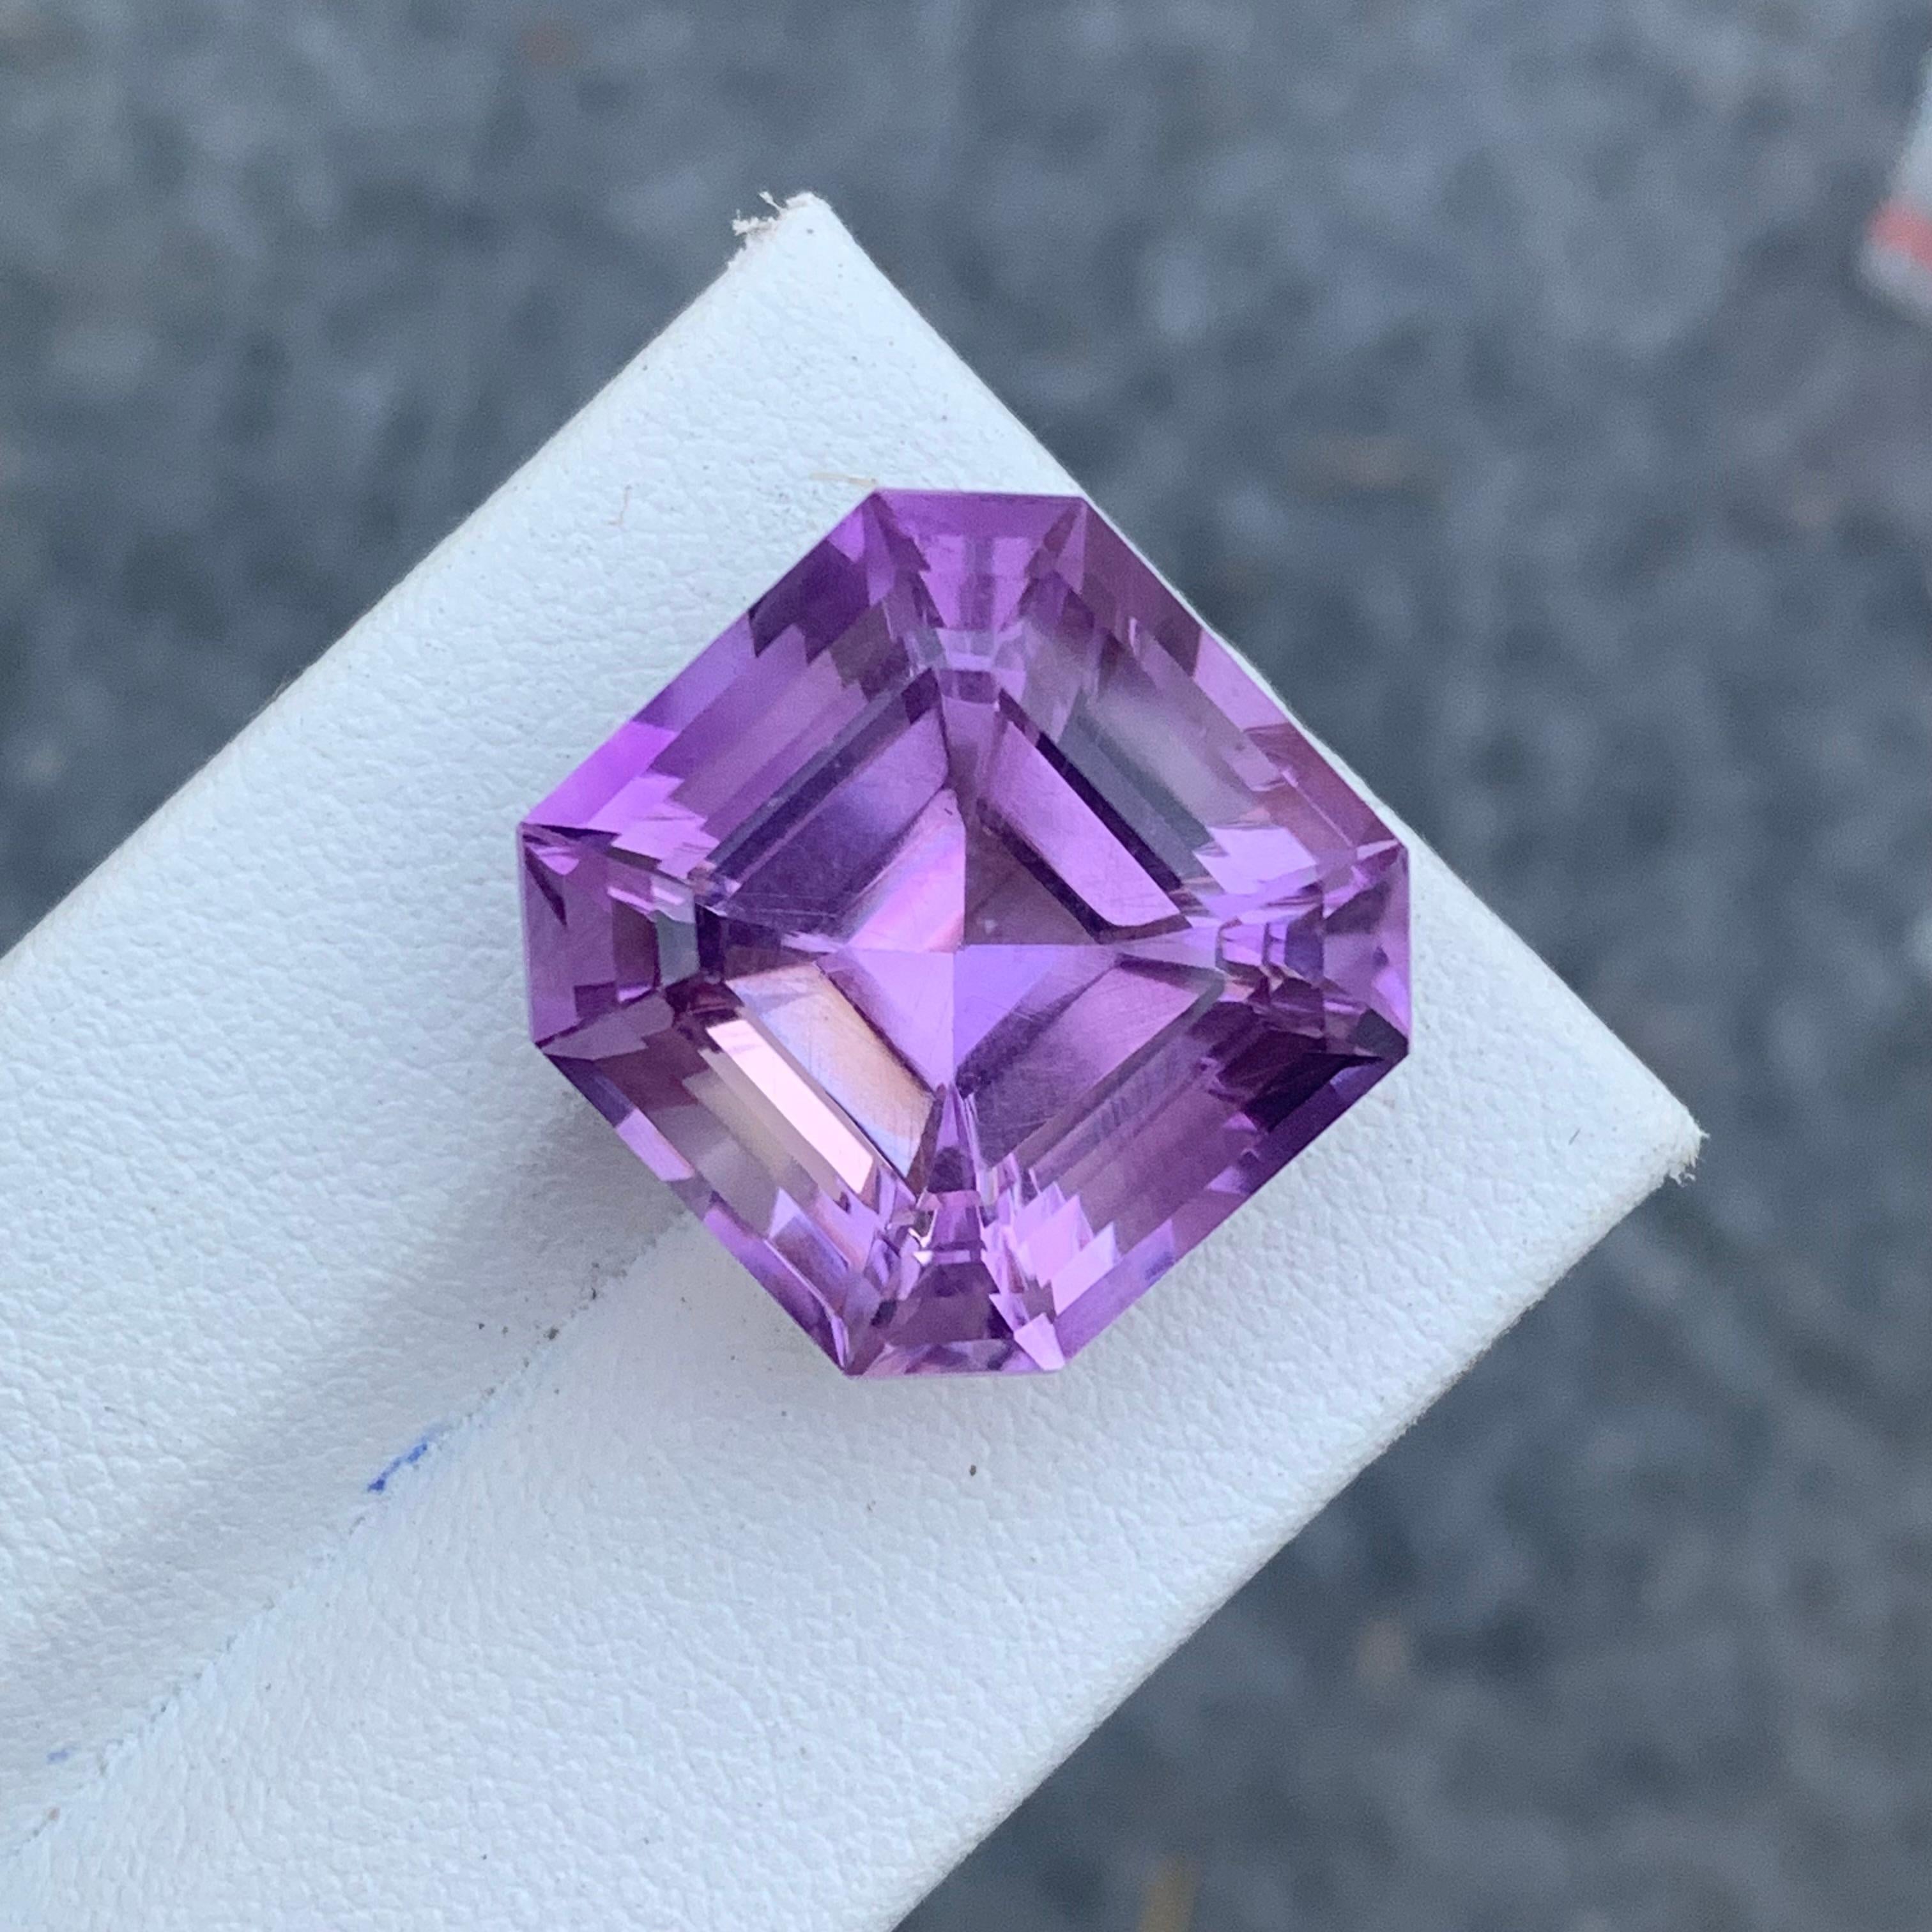 Gemstone Type : Amethyst
Weight : 27.60 Carats
Dimensions : 17.8x17.7x14.2 mm
Clarity : Eye Clean
Origin : Brazil
Color: Purple
Shape: Asscher
Certificate: On Demand
Month: February
.

Purported amethyst powers for healing
enhancing the immune